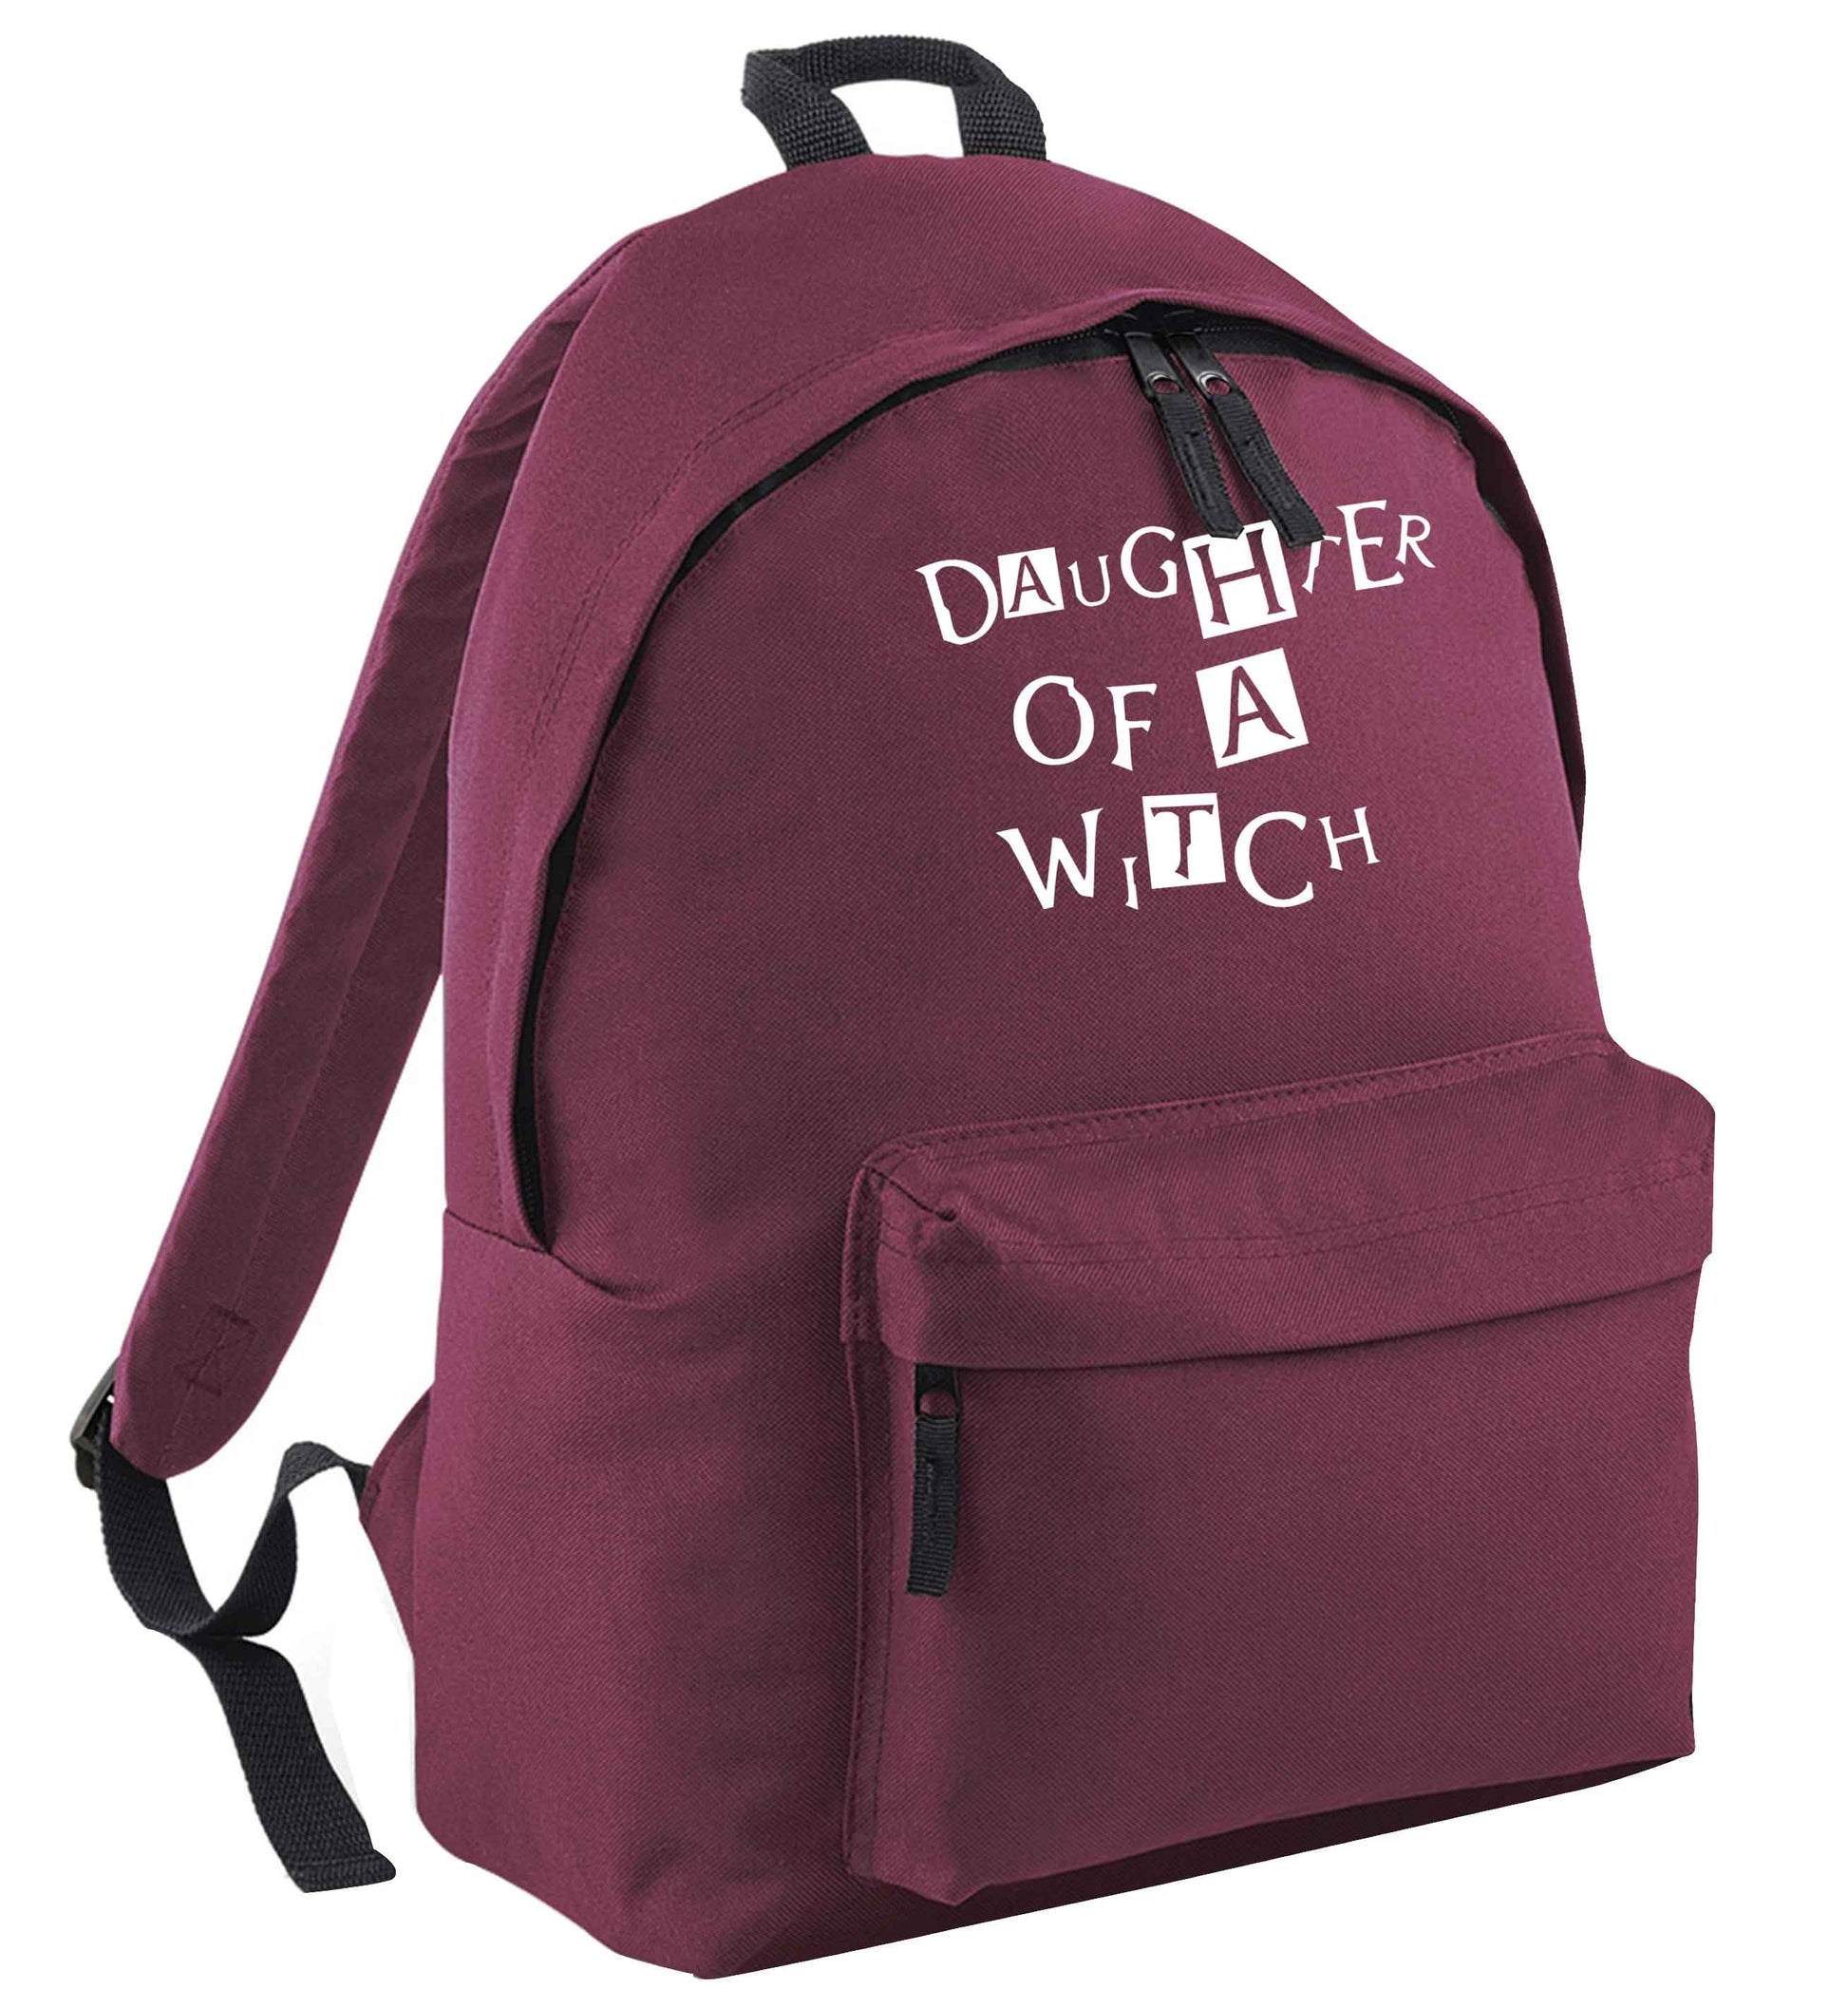 Daughter of a witch maroon adults backpack